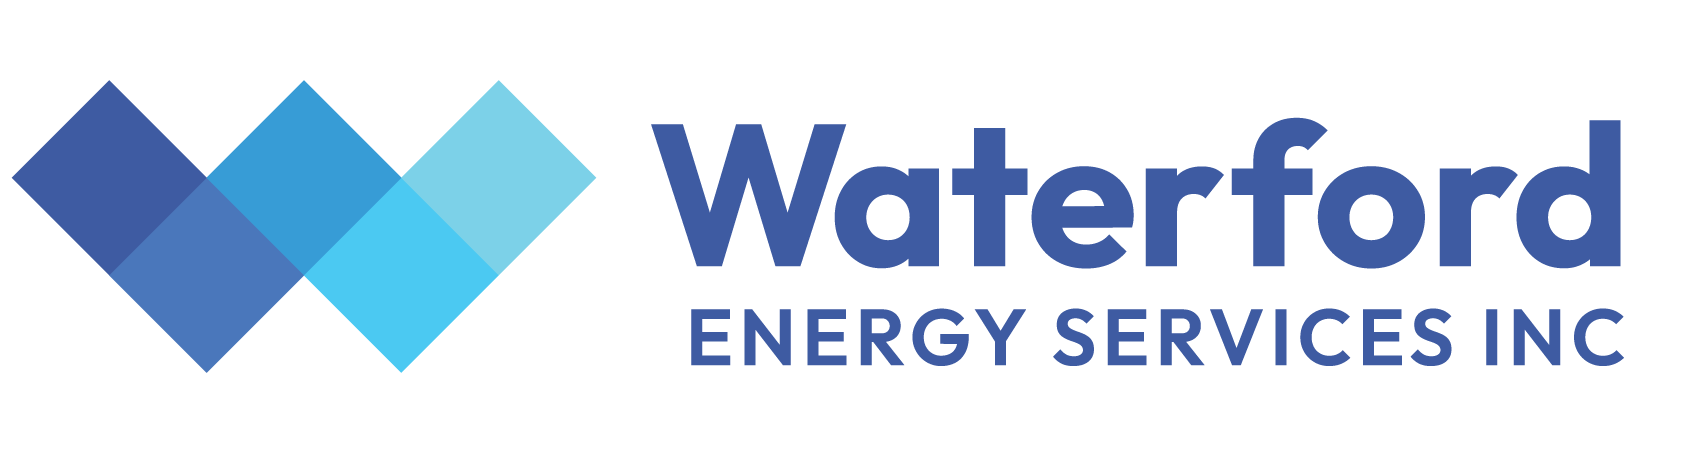 Waterford Energy Services Inc.